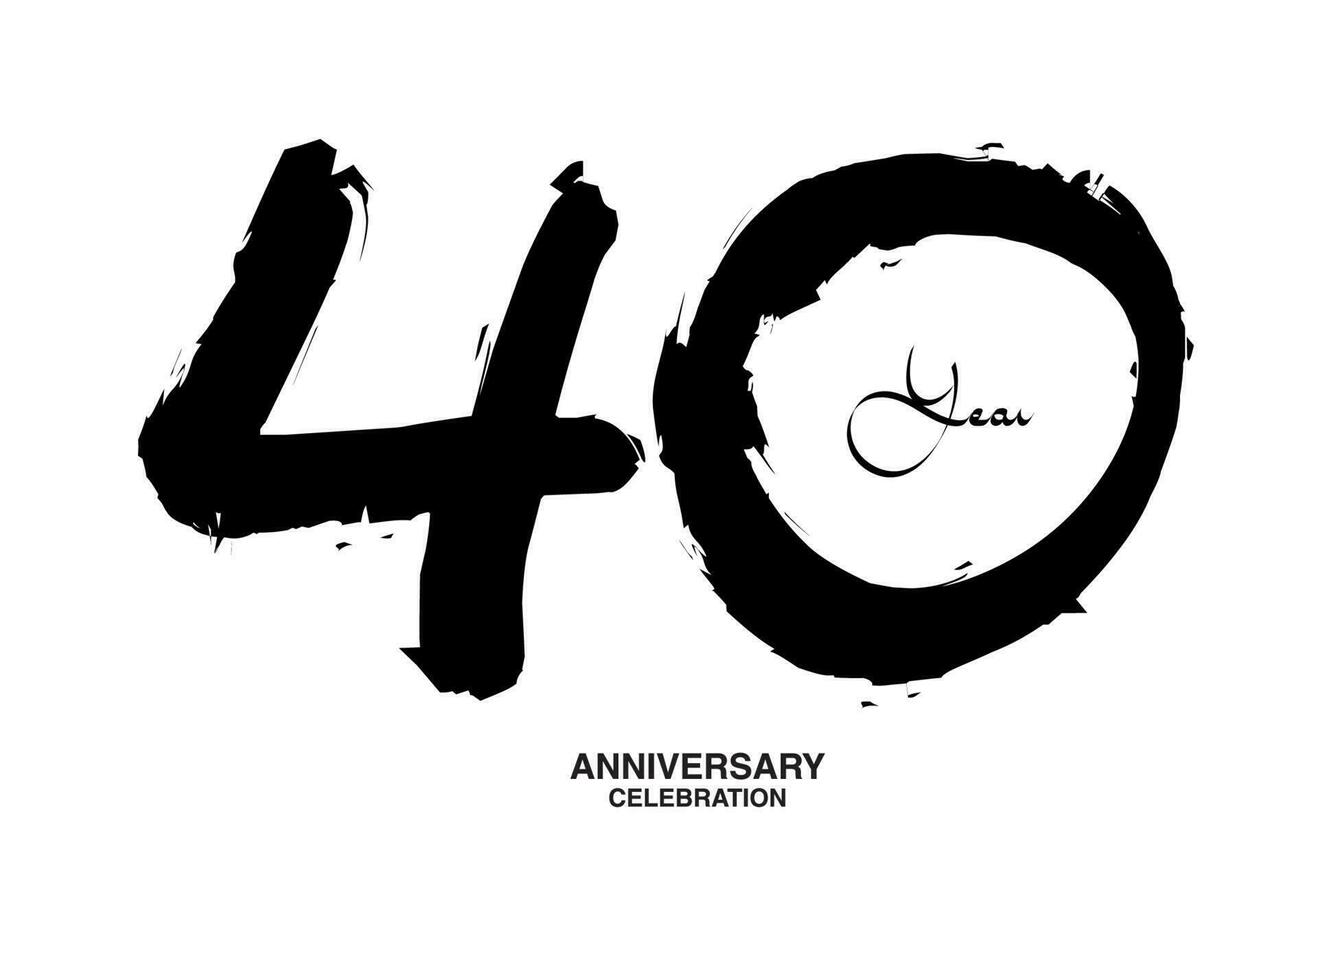 40 Years Anniversary Celebration Vector Template, 40 number logo design, 40th birthday, Black Lettering Numbers brush drawing hand drawn sketch, black number, Anniversary vector illustration